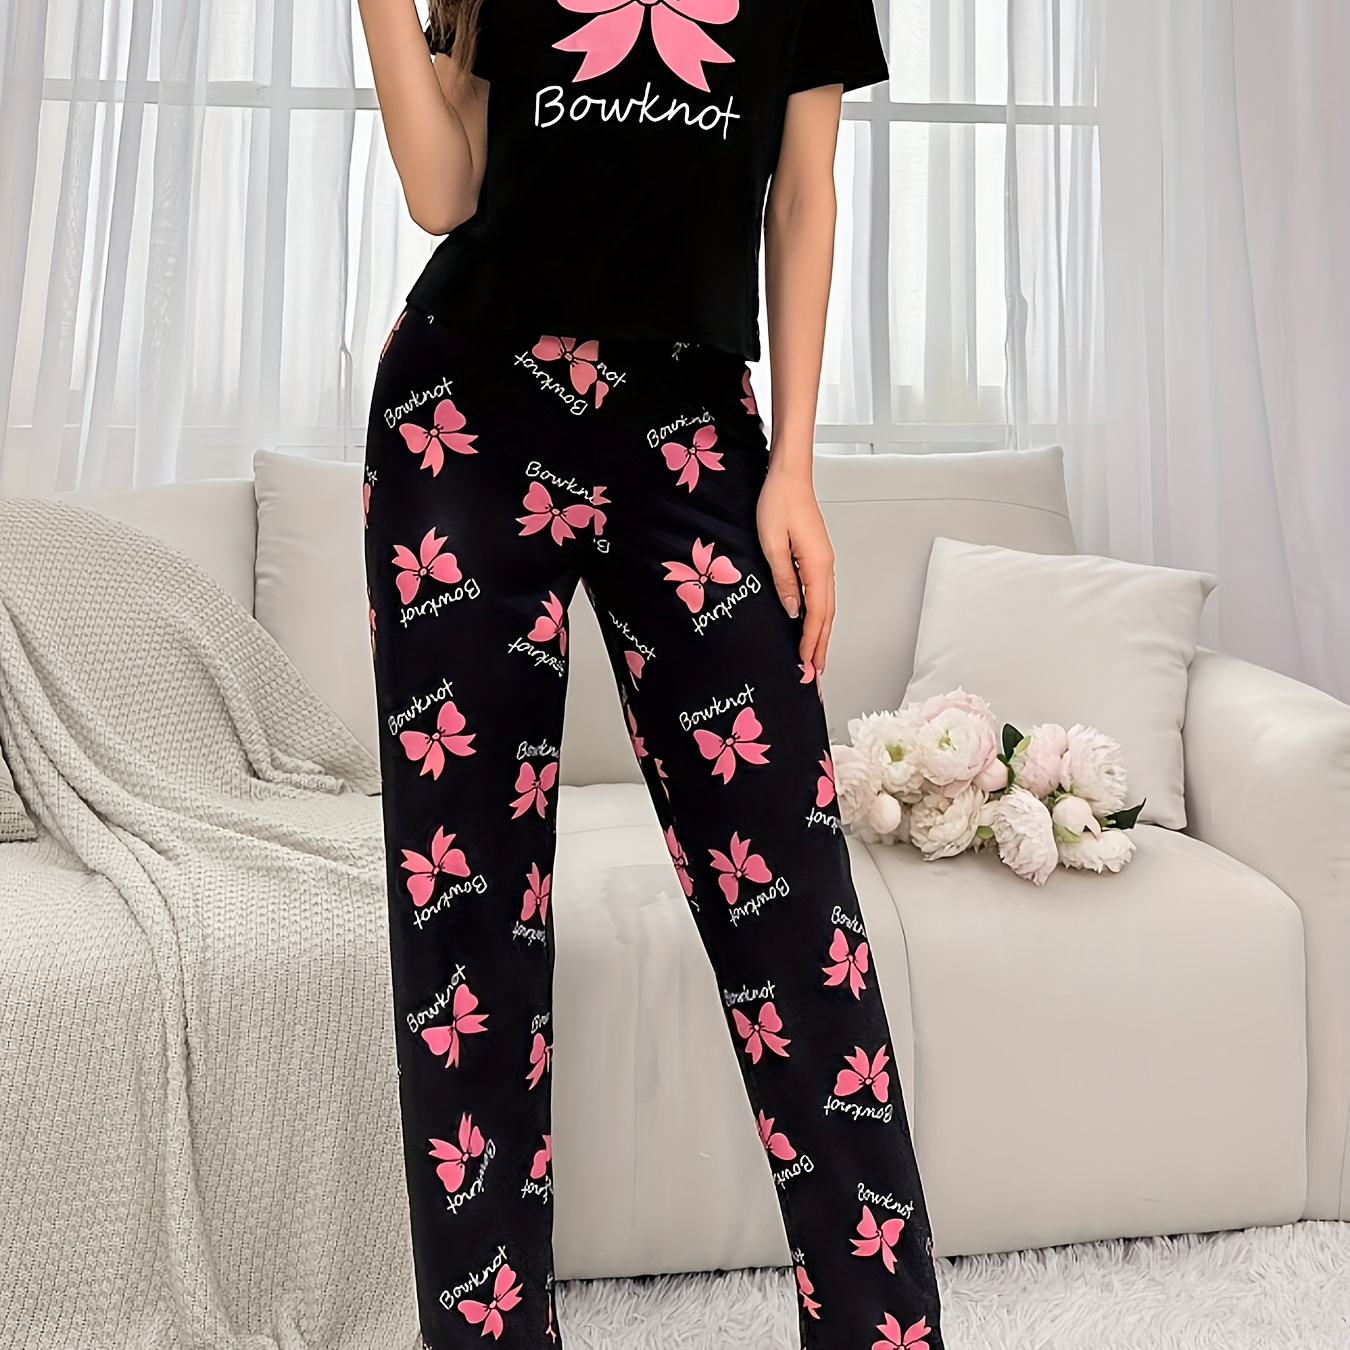 

Women's Bow & Letter Print Casual Pajama Set, Short Sleeve Round Neck Top & Pants, Comfortable Relaxed Fit